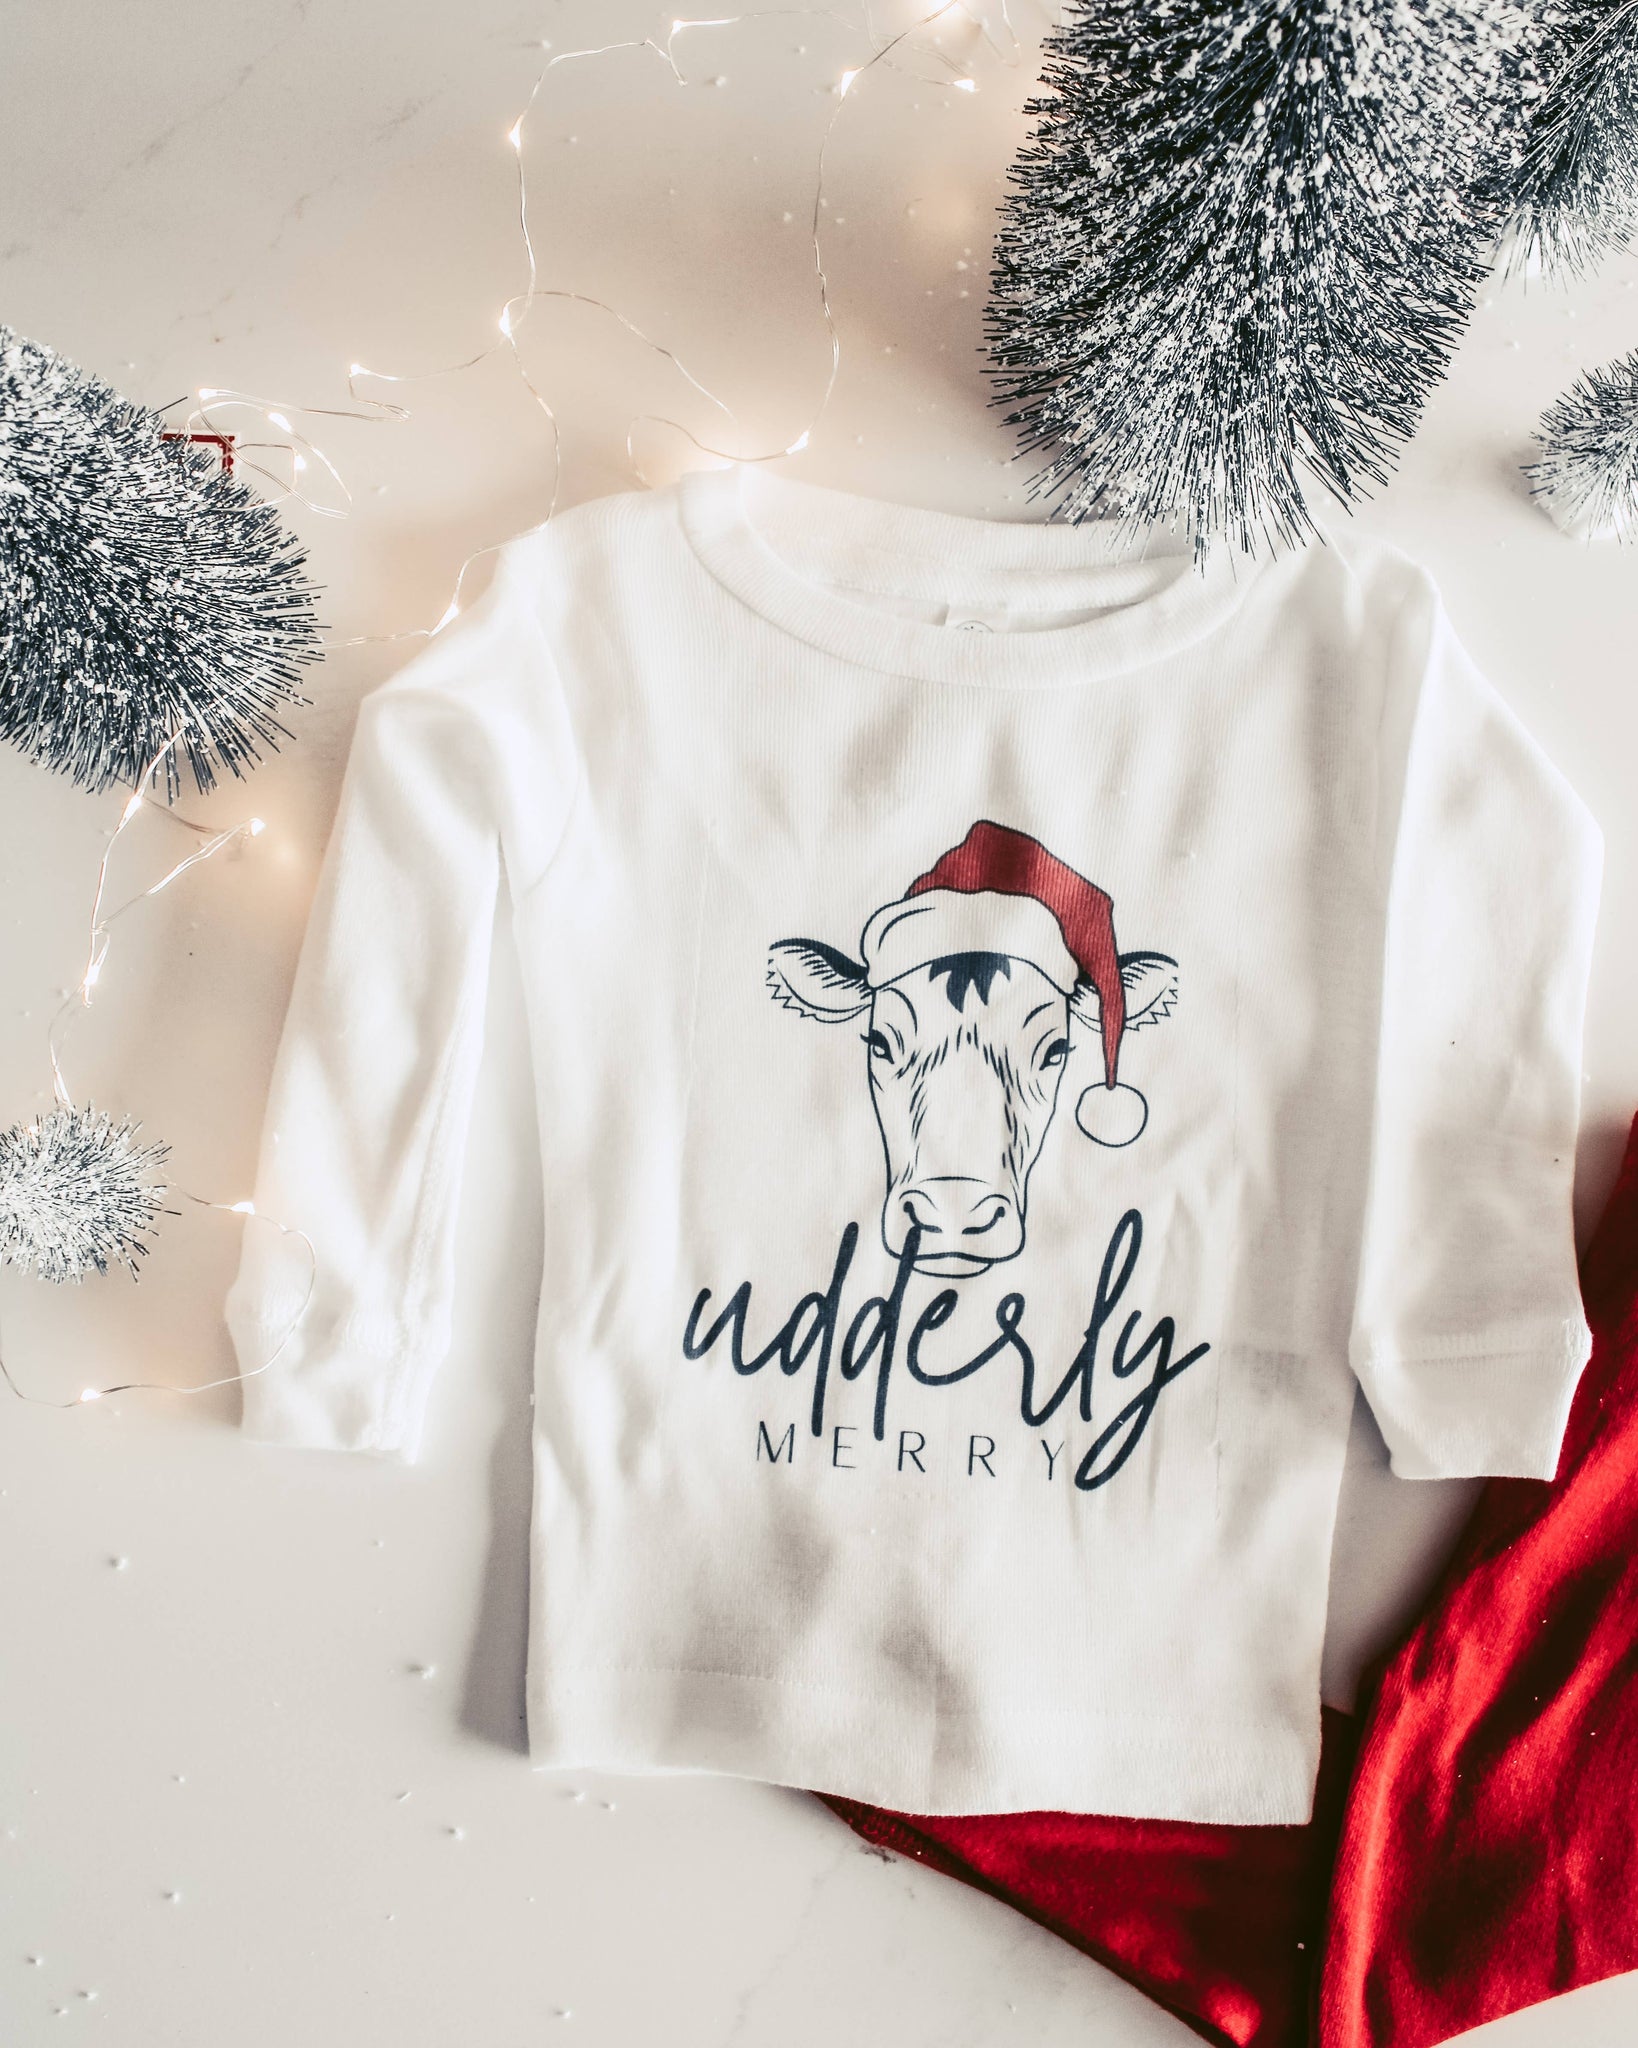 Brand of Bliss Udderly Merry l Christmas Pajamas